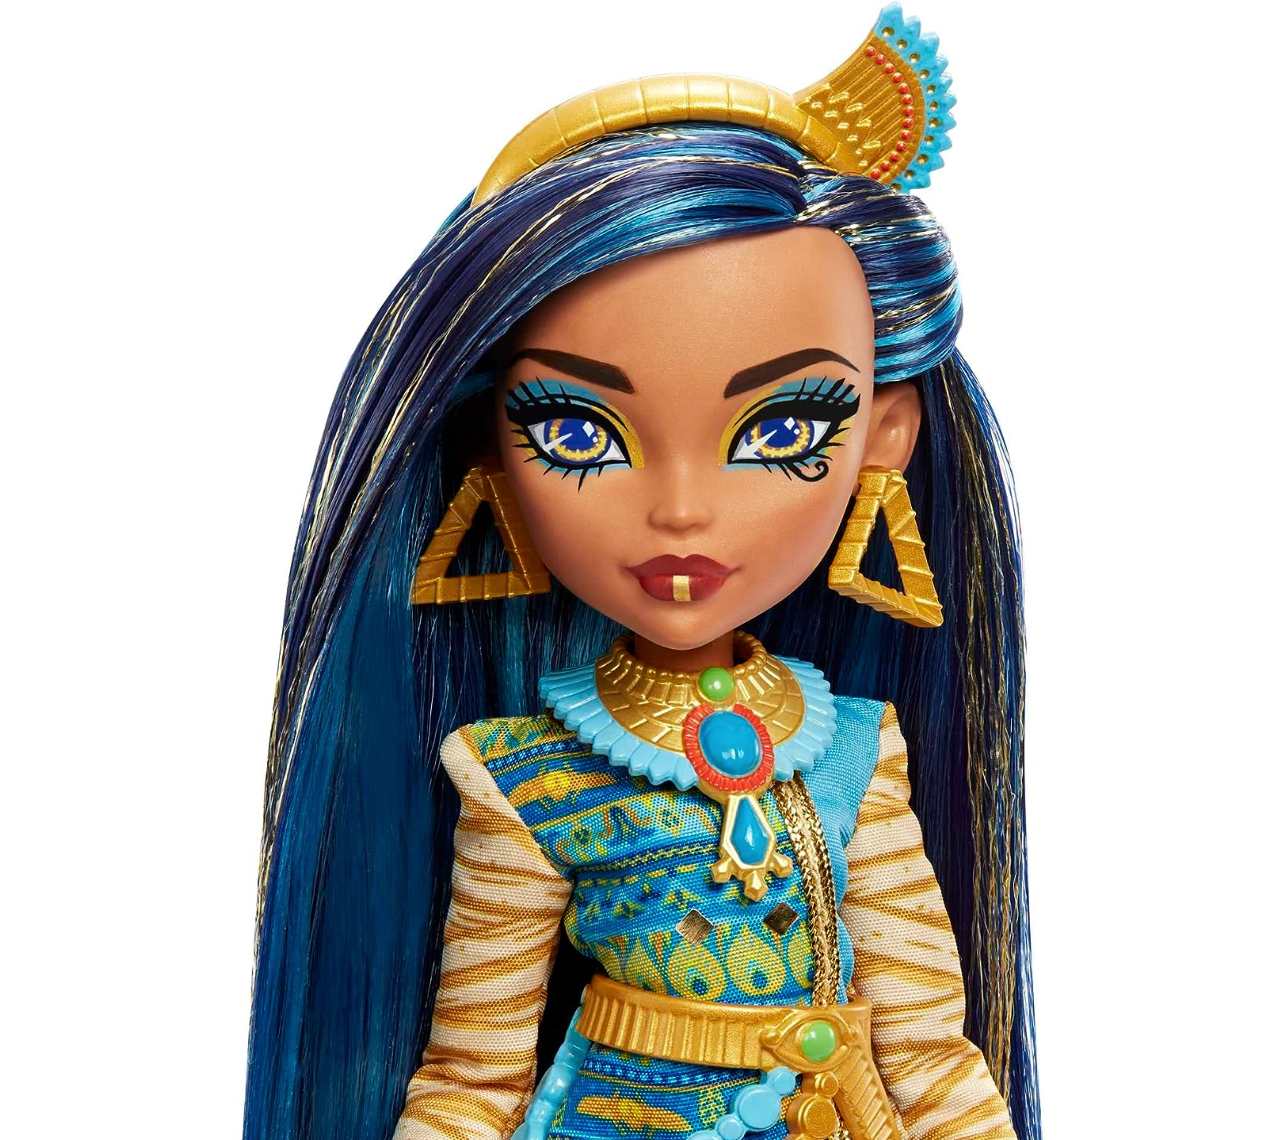 Monster High Cleo De Nile Fashion Doll with Blue Streaked Hair, Signature Look, Accessories & Pet Dog